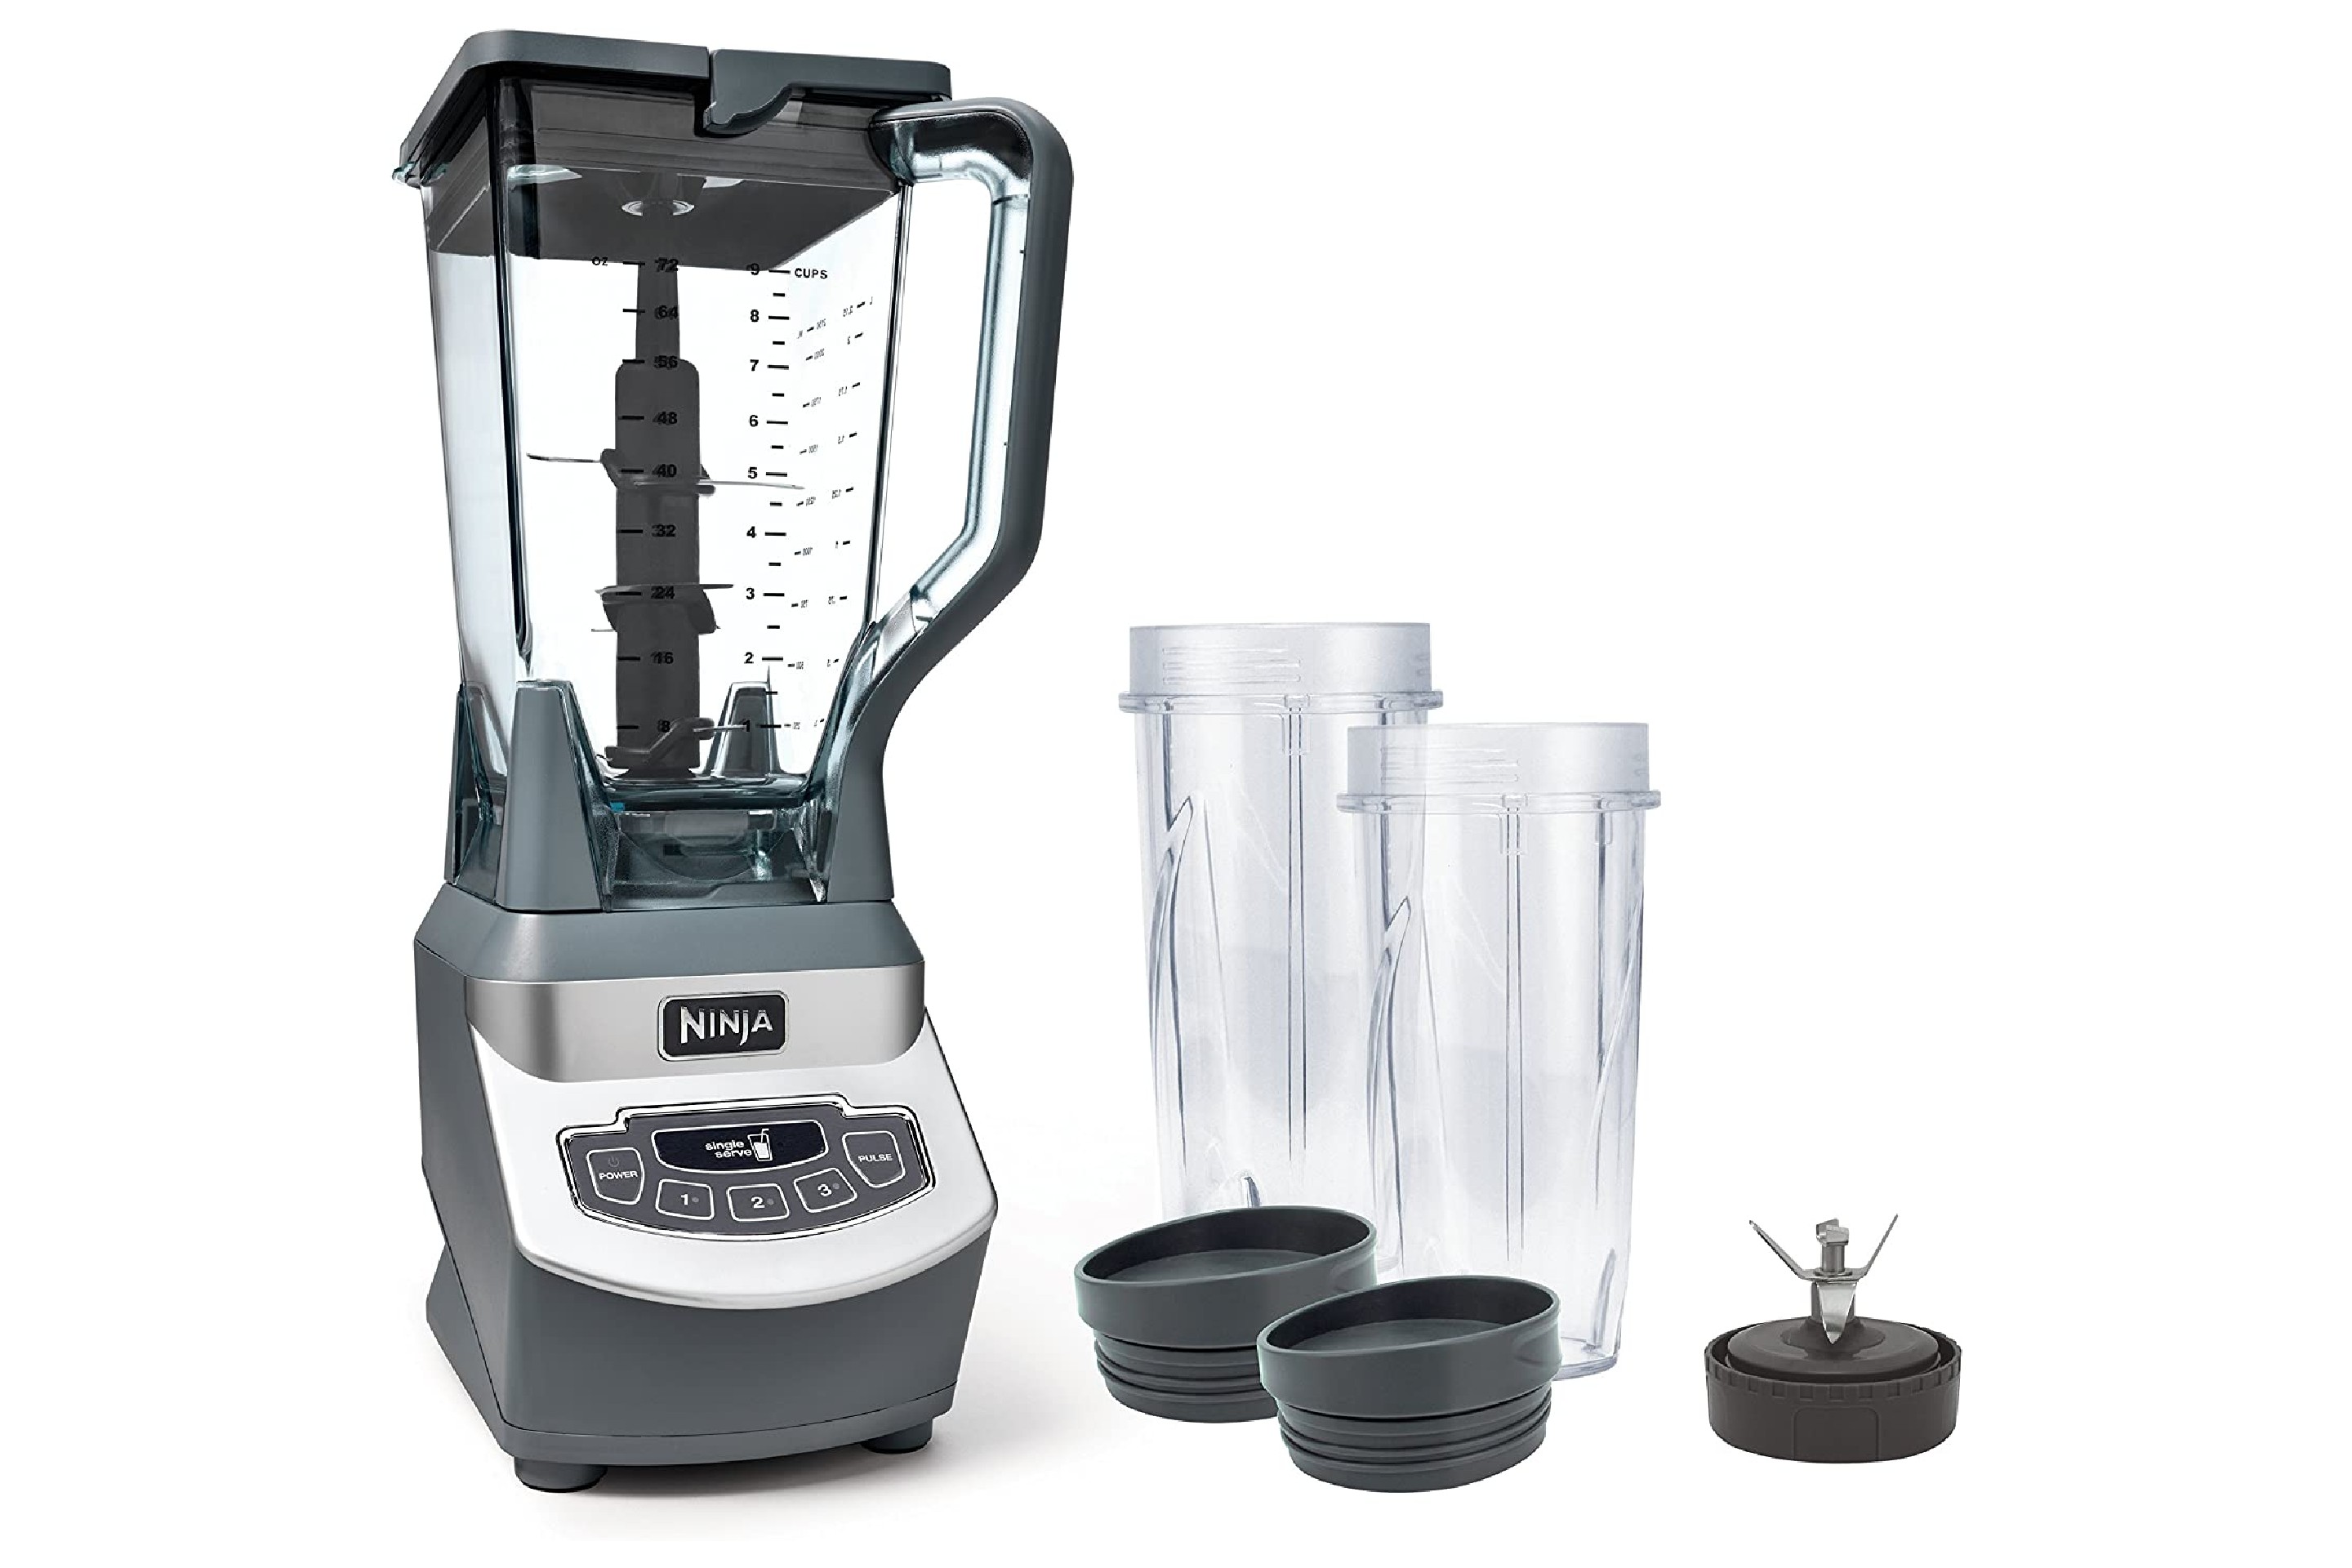 The Best Blenders for Smoothies